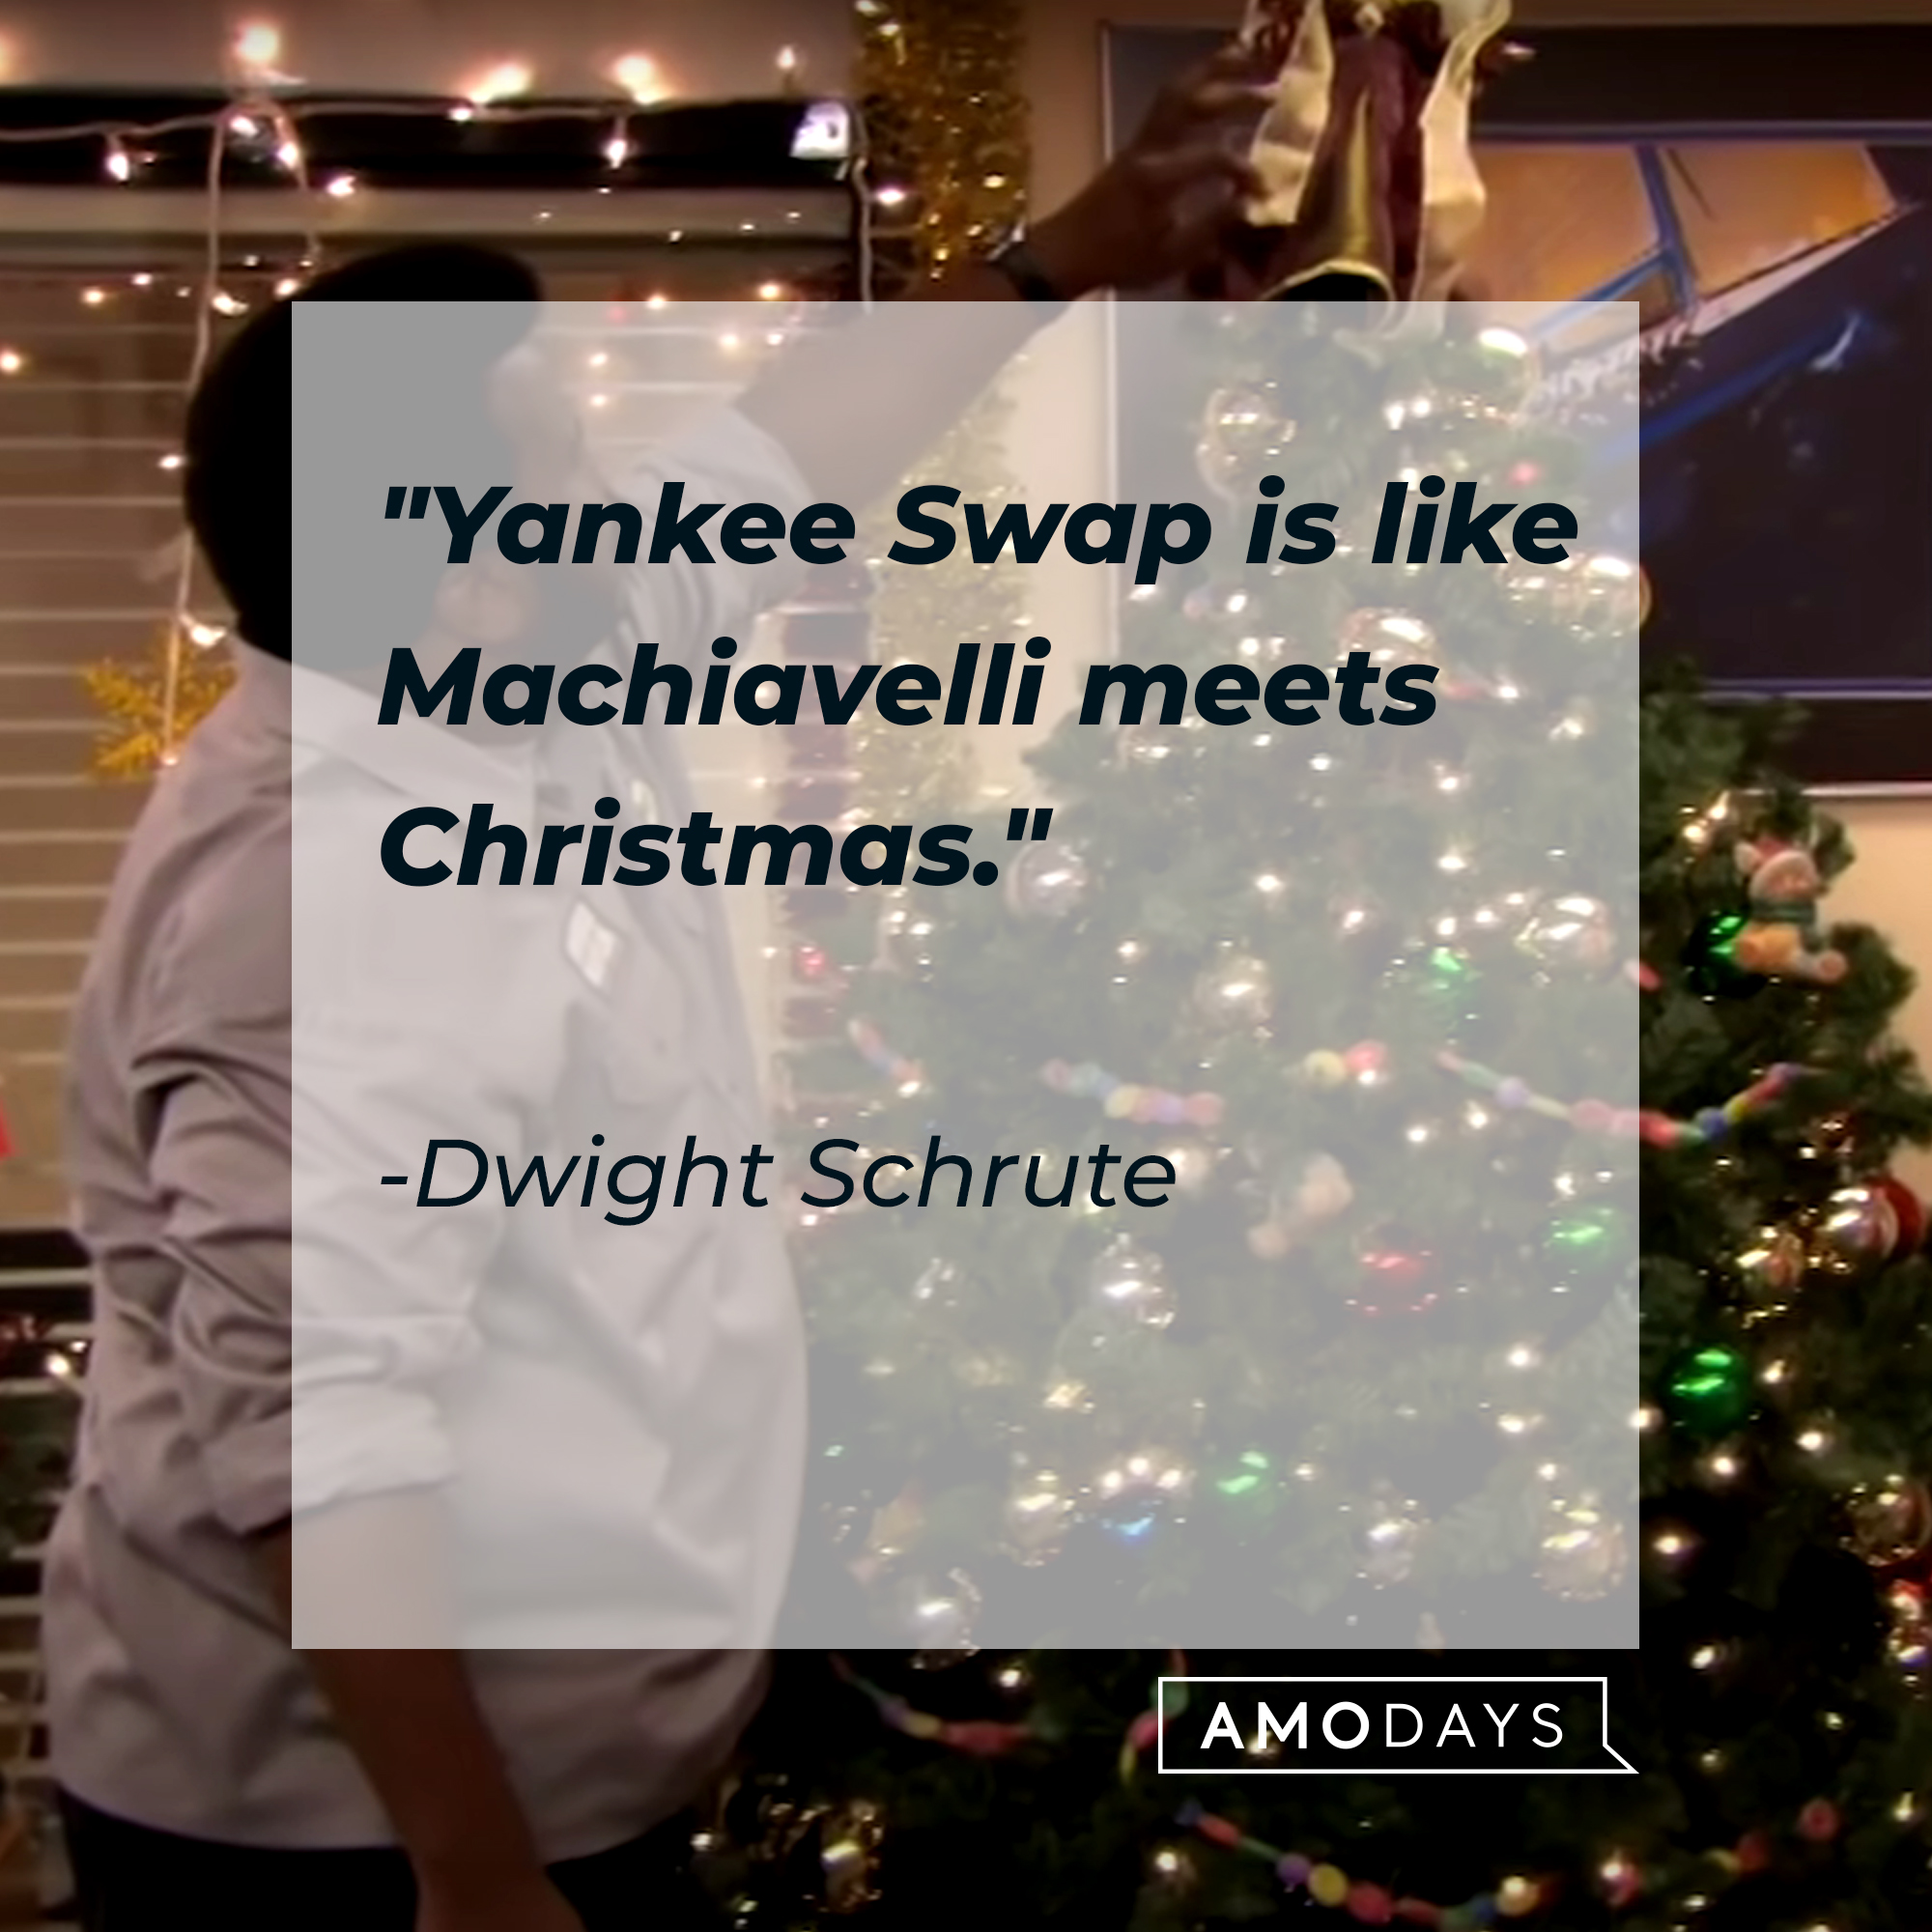 Dwight Schrute’s quote: Yankee Swap is like Machiavelli meets Christmas. | Source: Youtube/TheOffice